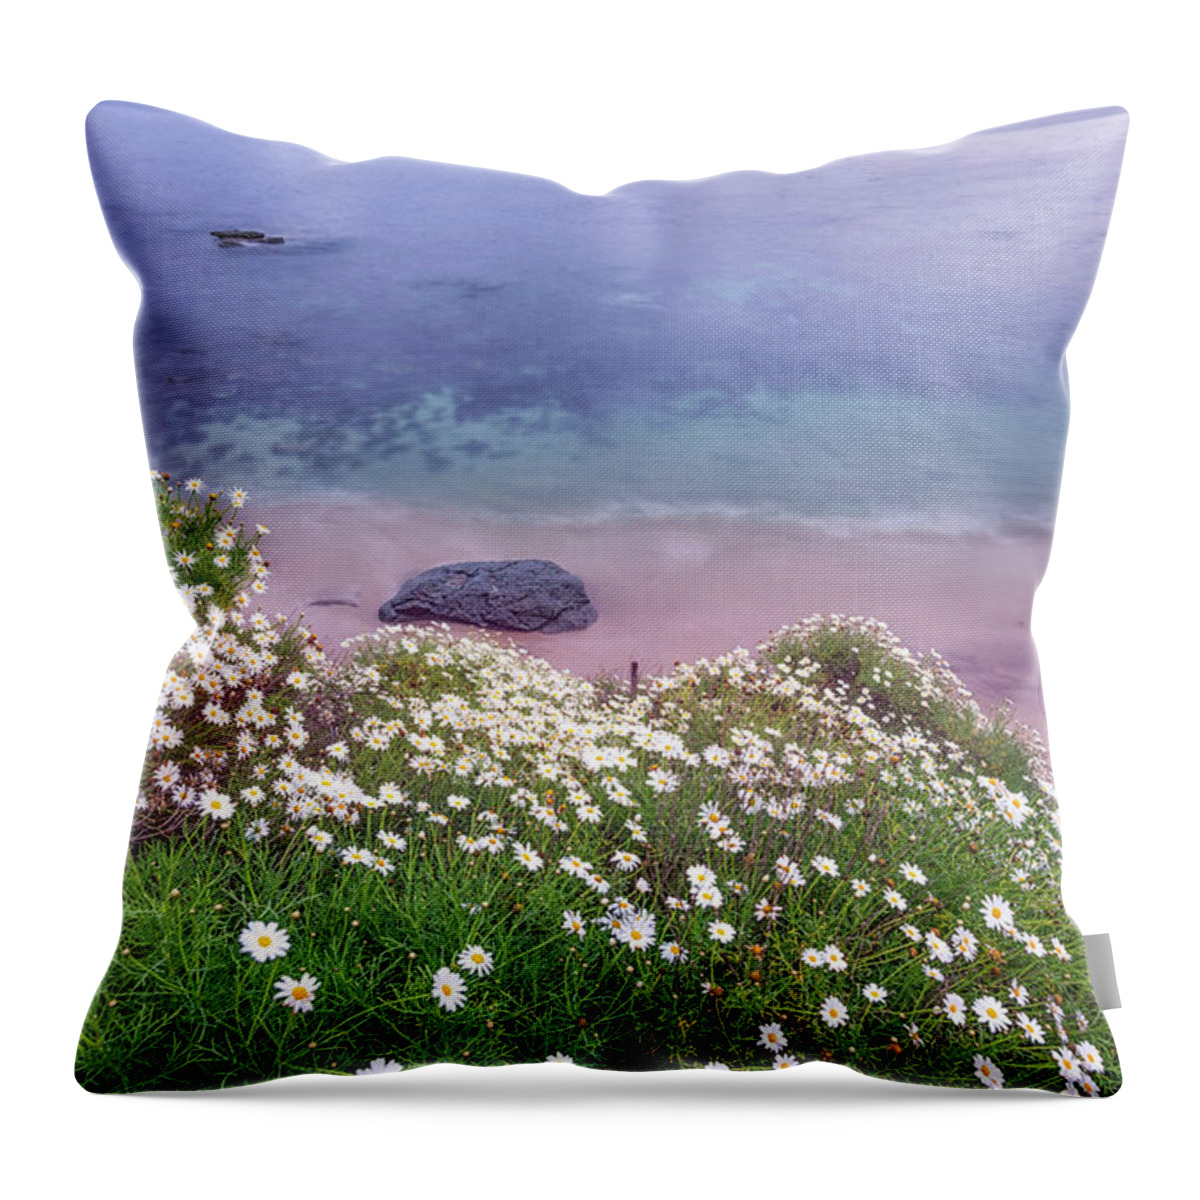 Daisy Throw Pillow featuring the photograph Dainty Daisies At The Cove by Joseph S Giacalone